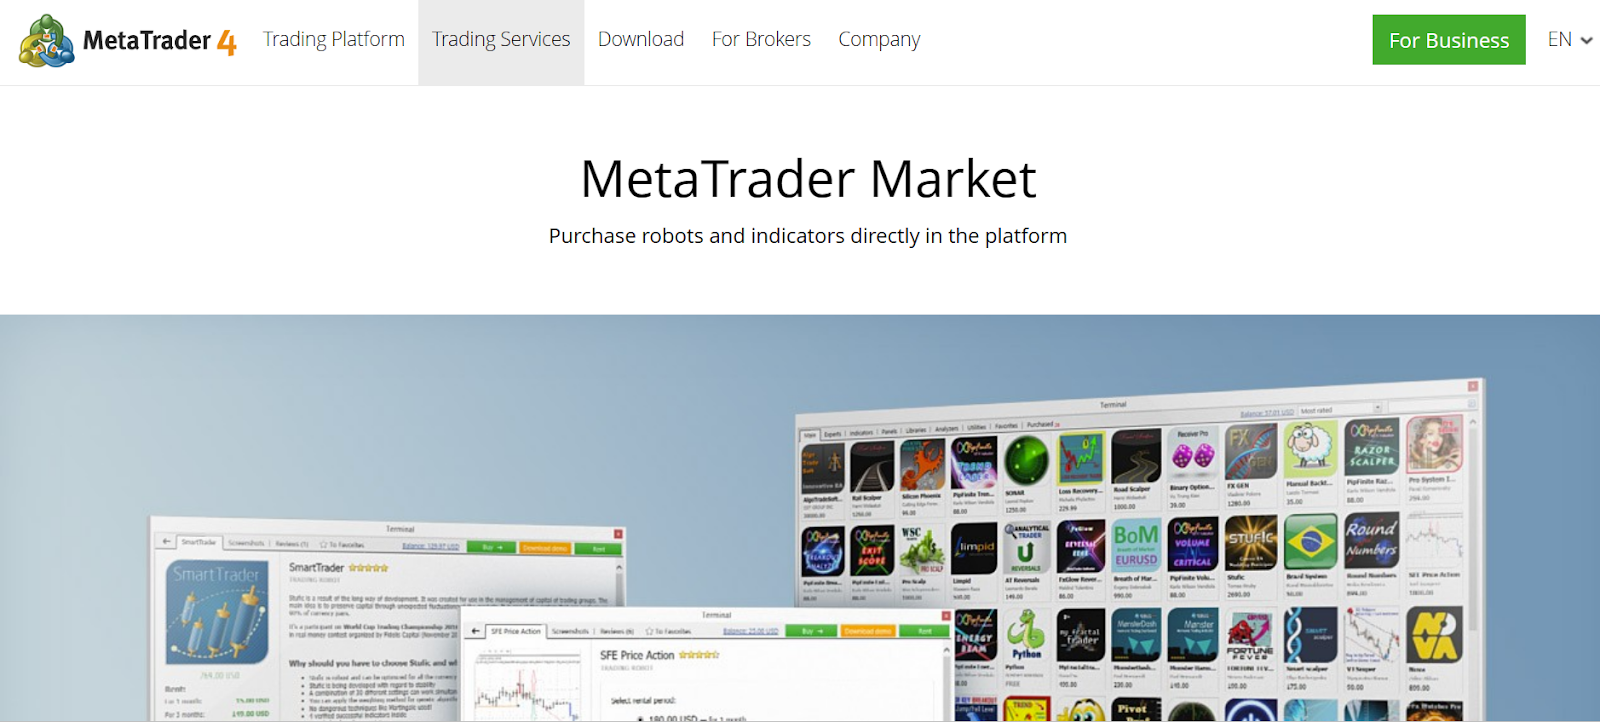 MT4 markets apply many options on trading assistant